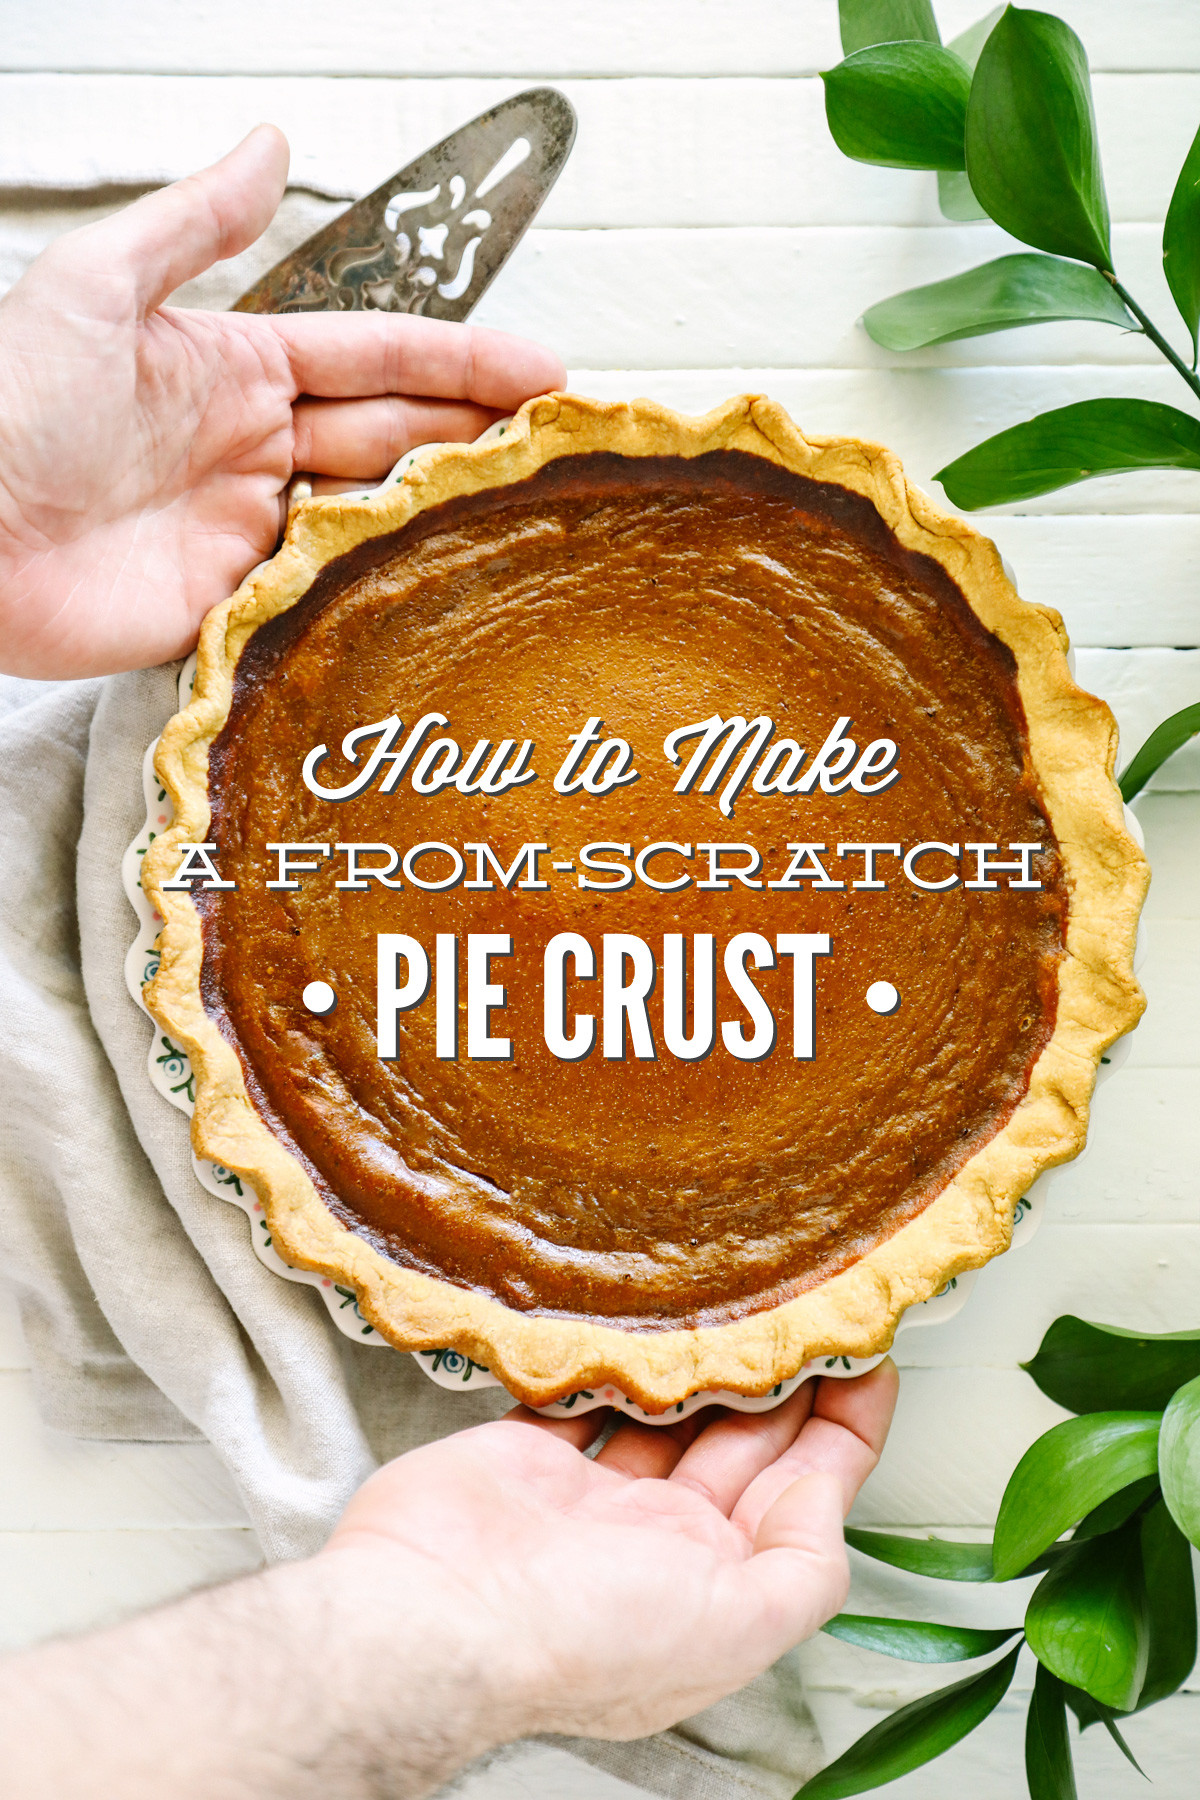 How To Make Pumpkin Pie From Scratch
 How to Make a From Scratch Pie Crust Live Simply